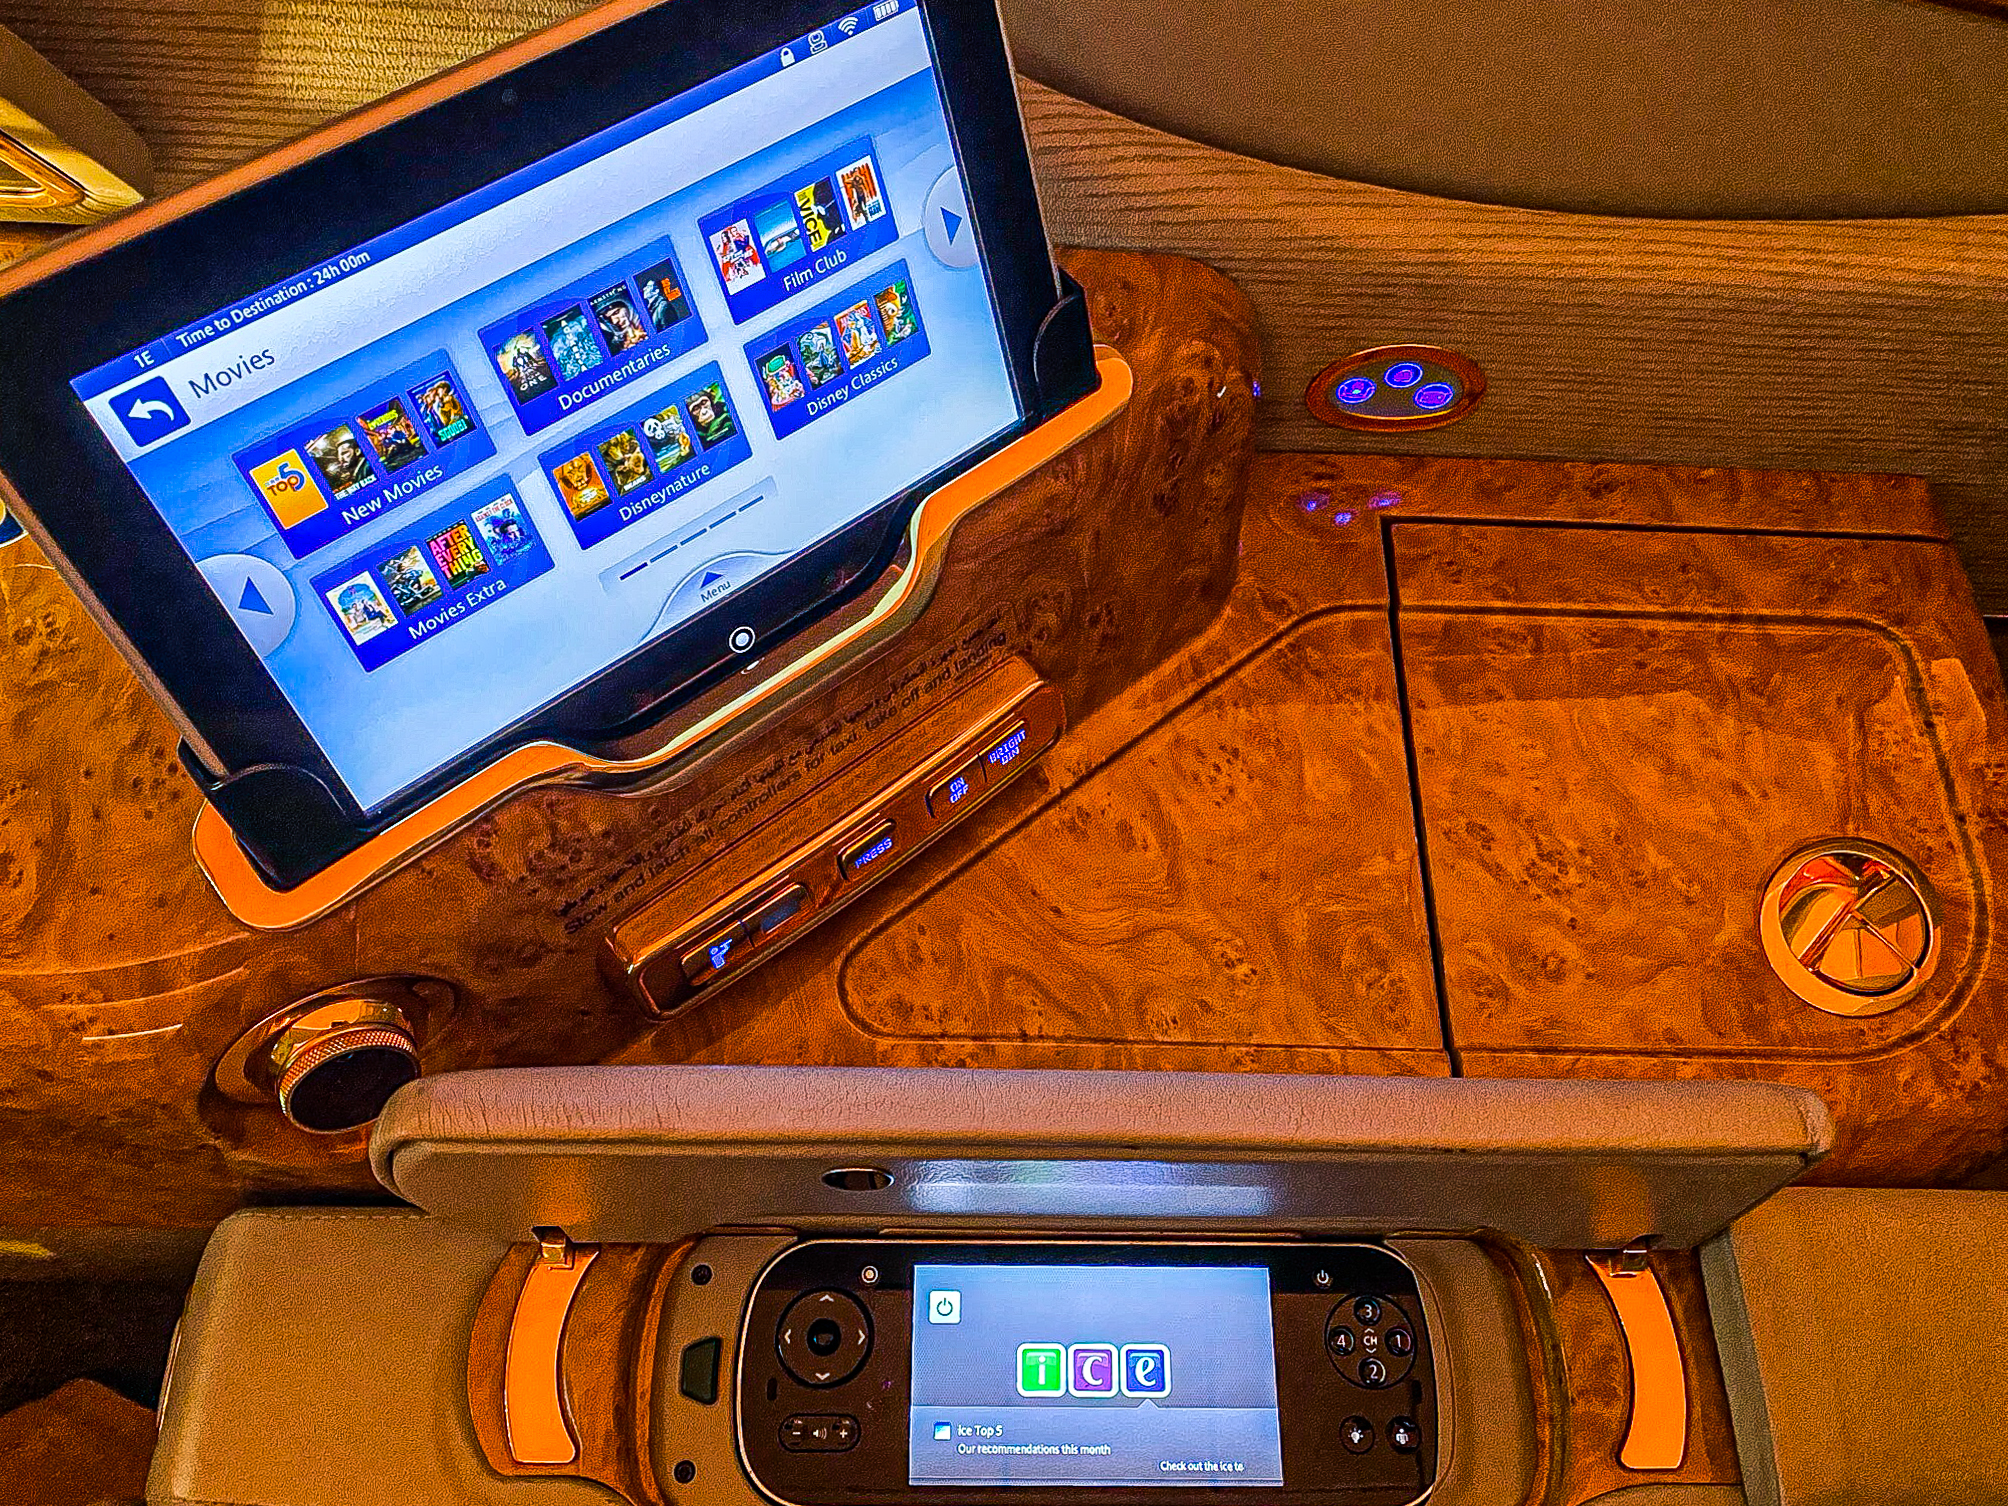 Emirates 777 First Class In Flight Entertainment Remote And Tablet